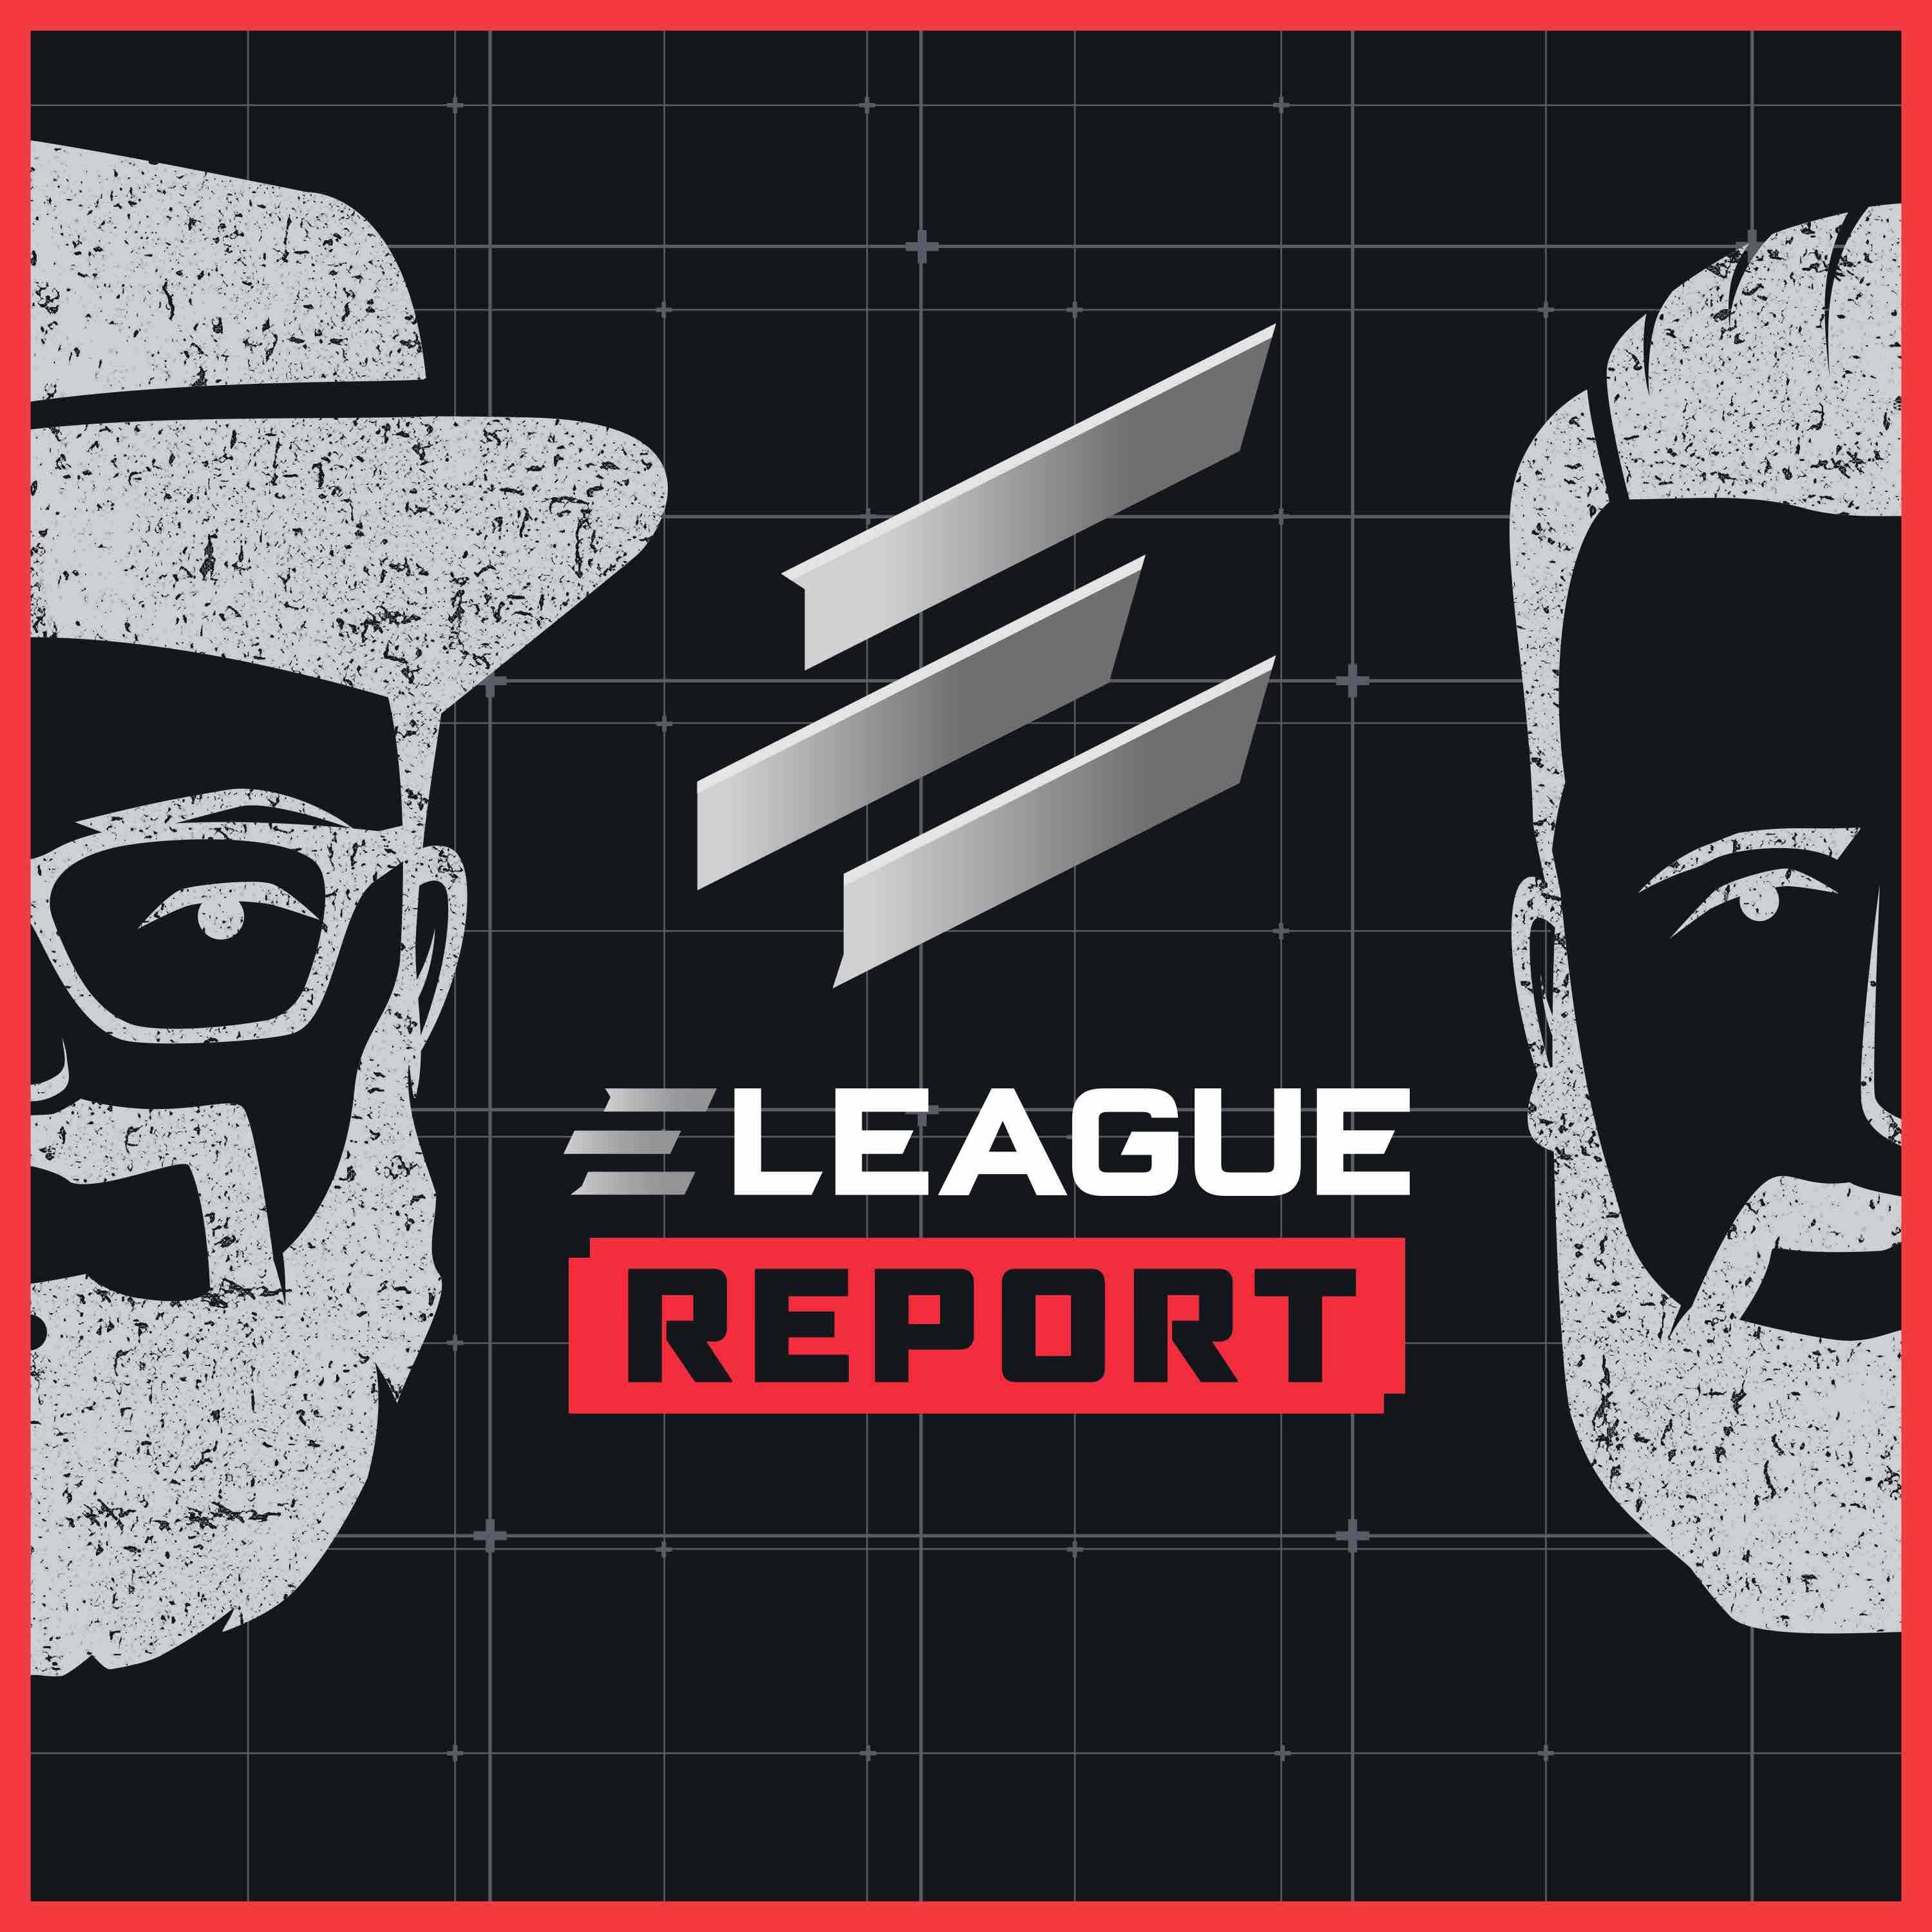 ELEAGUE Cup, Paladins Premier League with Todd Harris, Kobolds and Catacombs with Dr Jikininki and John Horstmann, Boston Major with Kevin Hitt, Overwatch League Sanctions